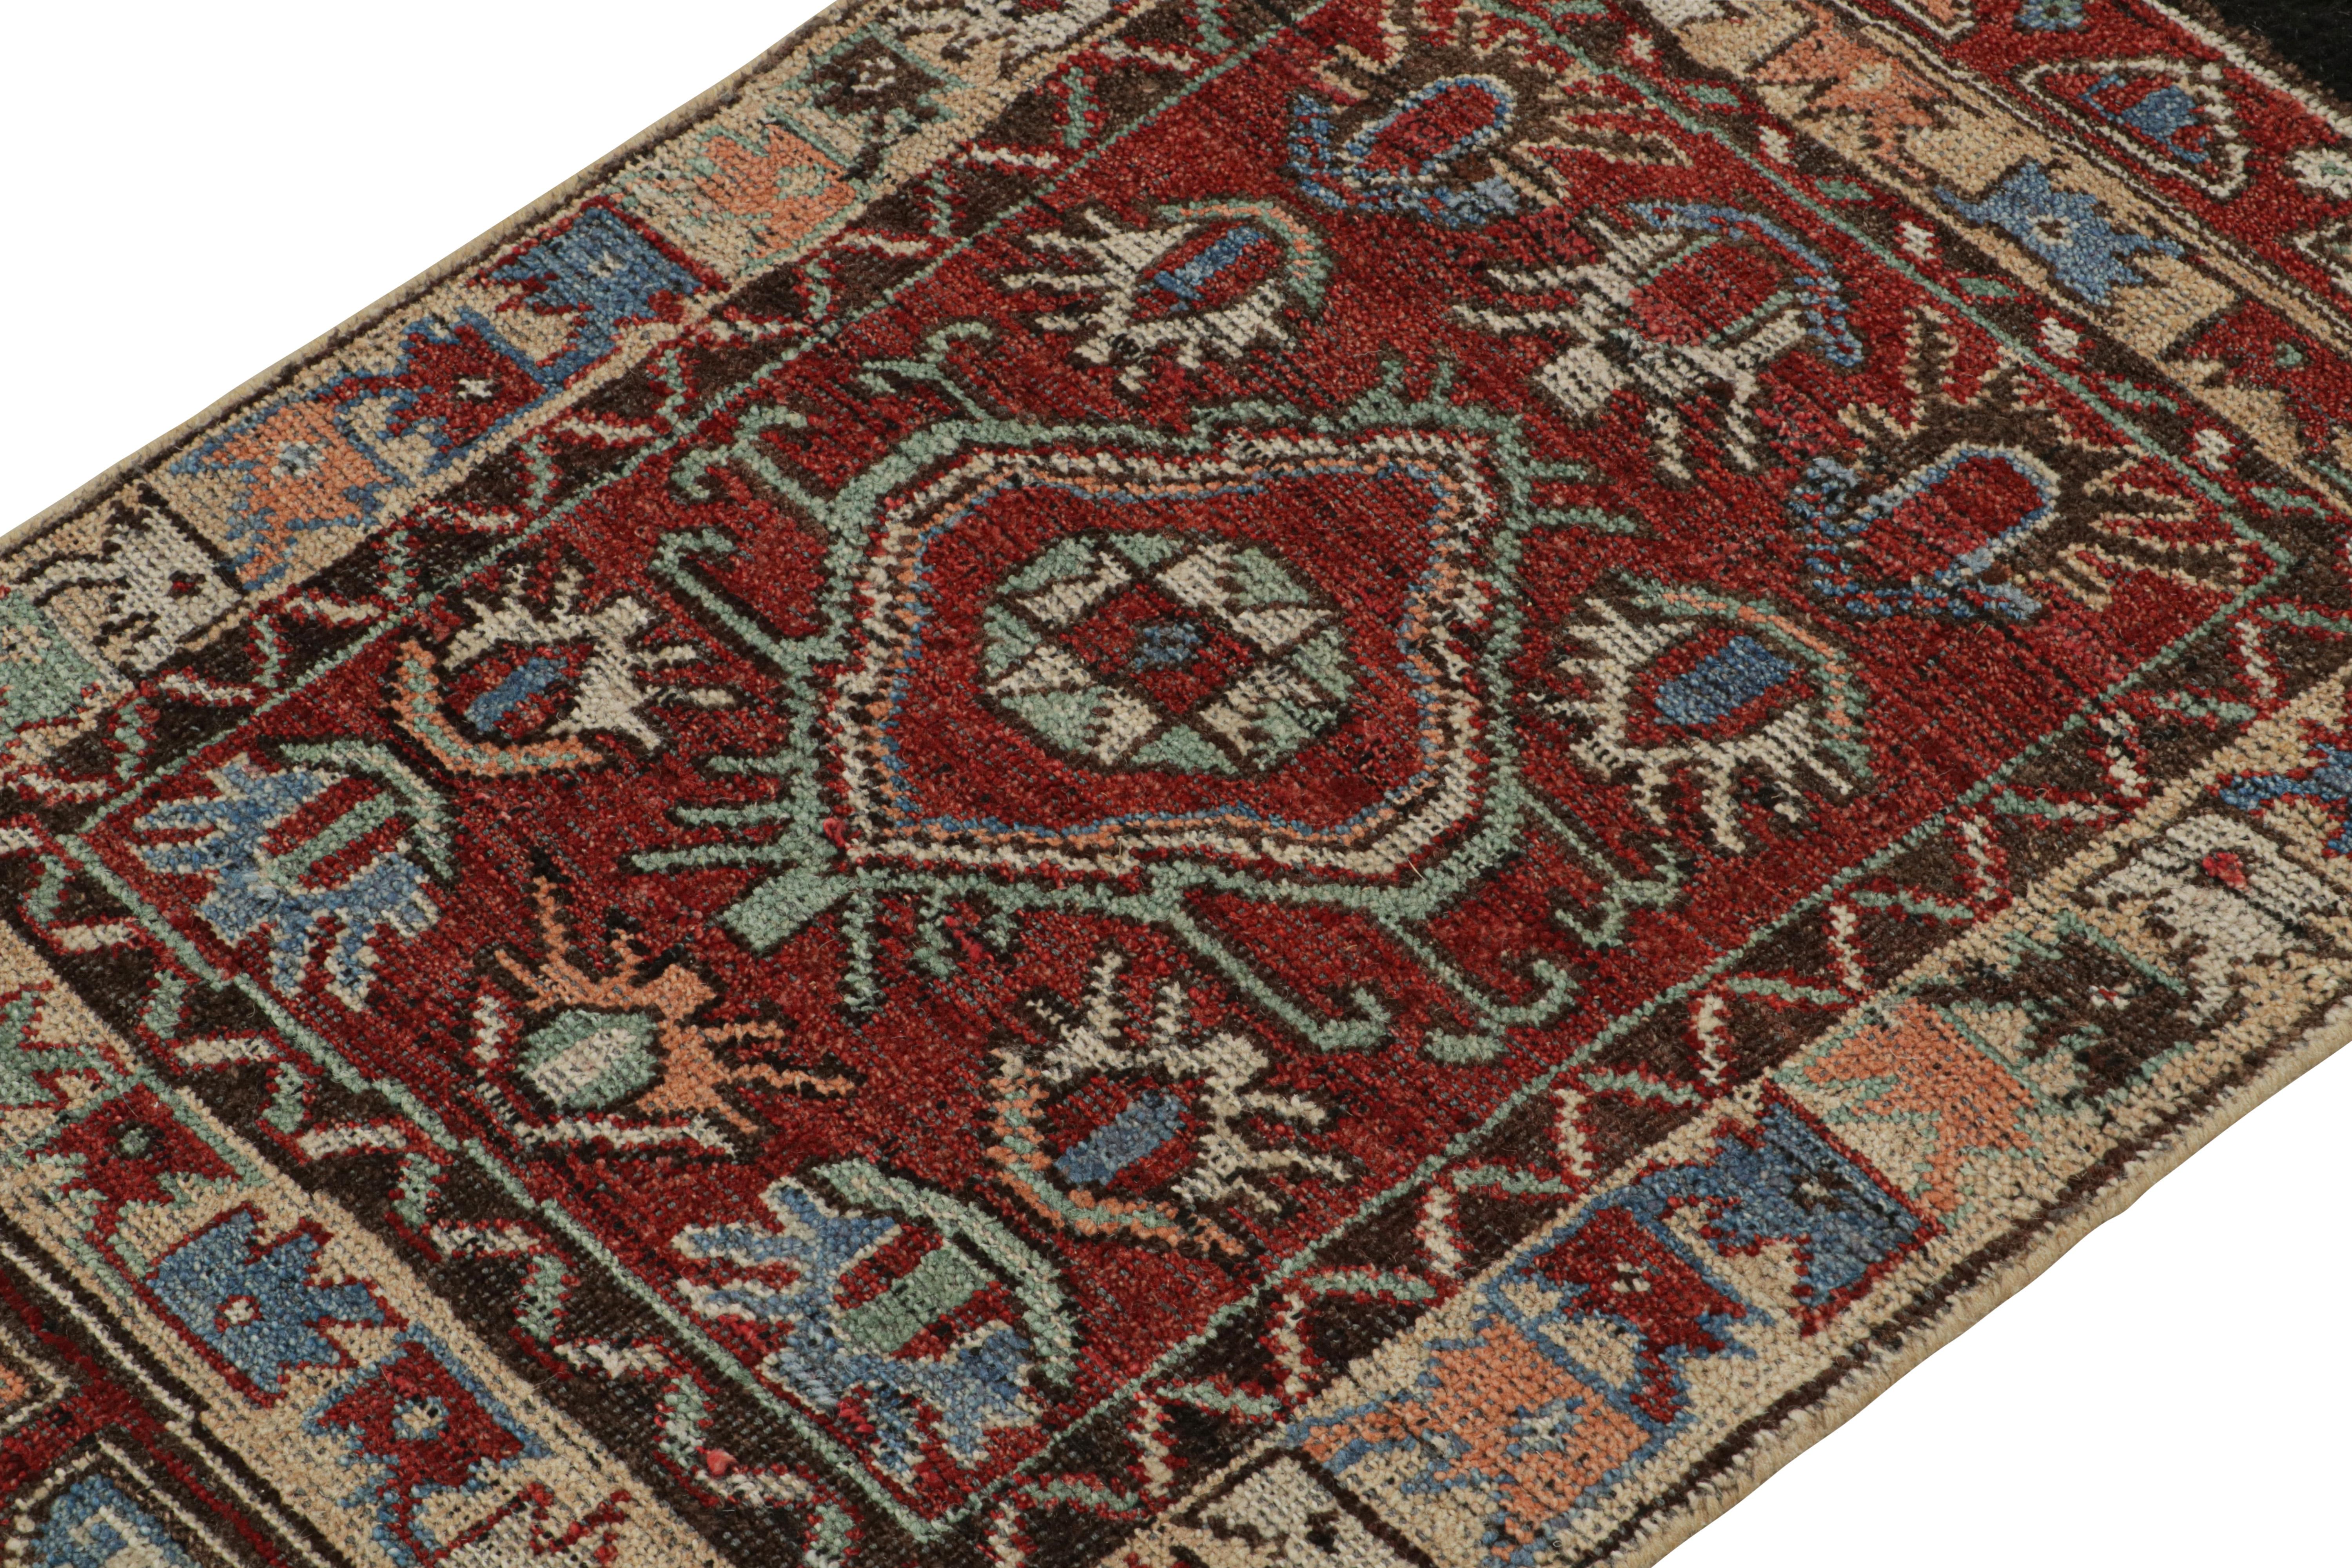 Hand-Knotted Rug & Kilim’s Antique Tribal Style Rug in Red, Blue, Green & Black Patterns For Sale